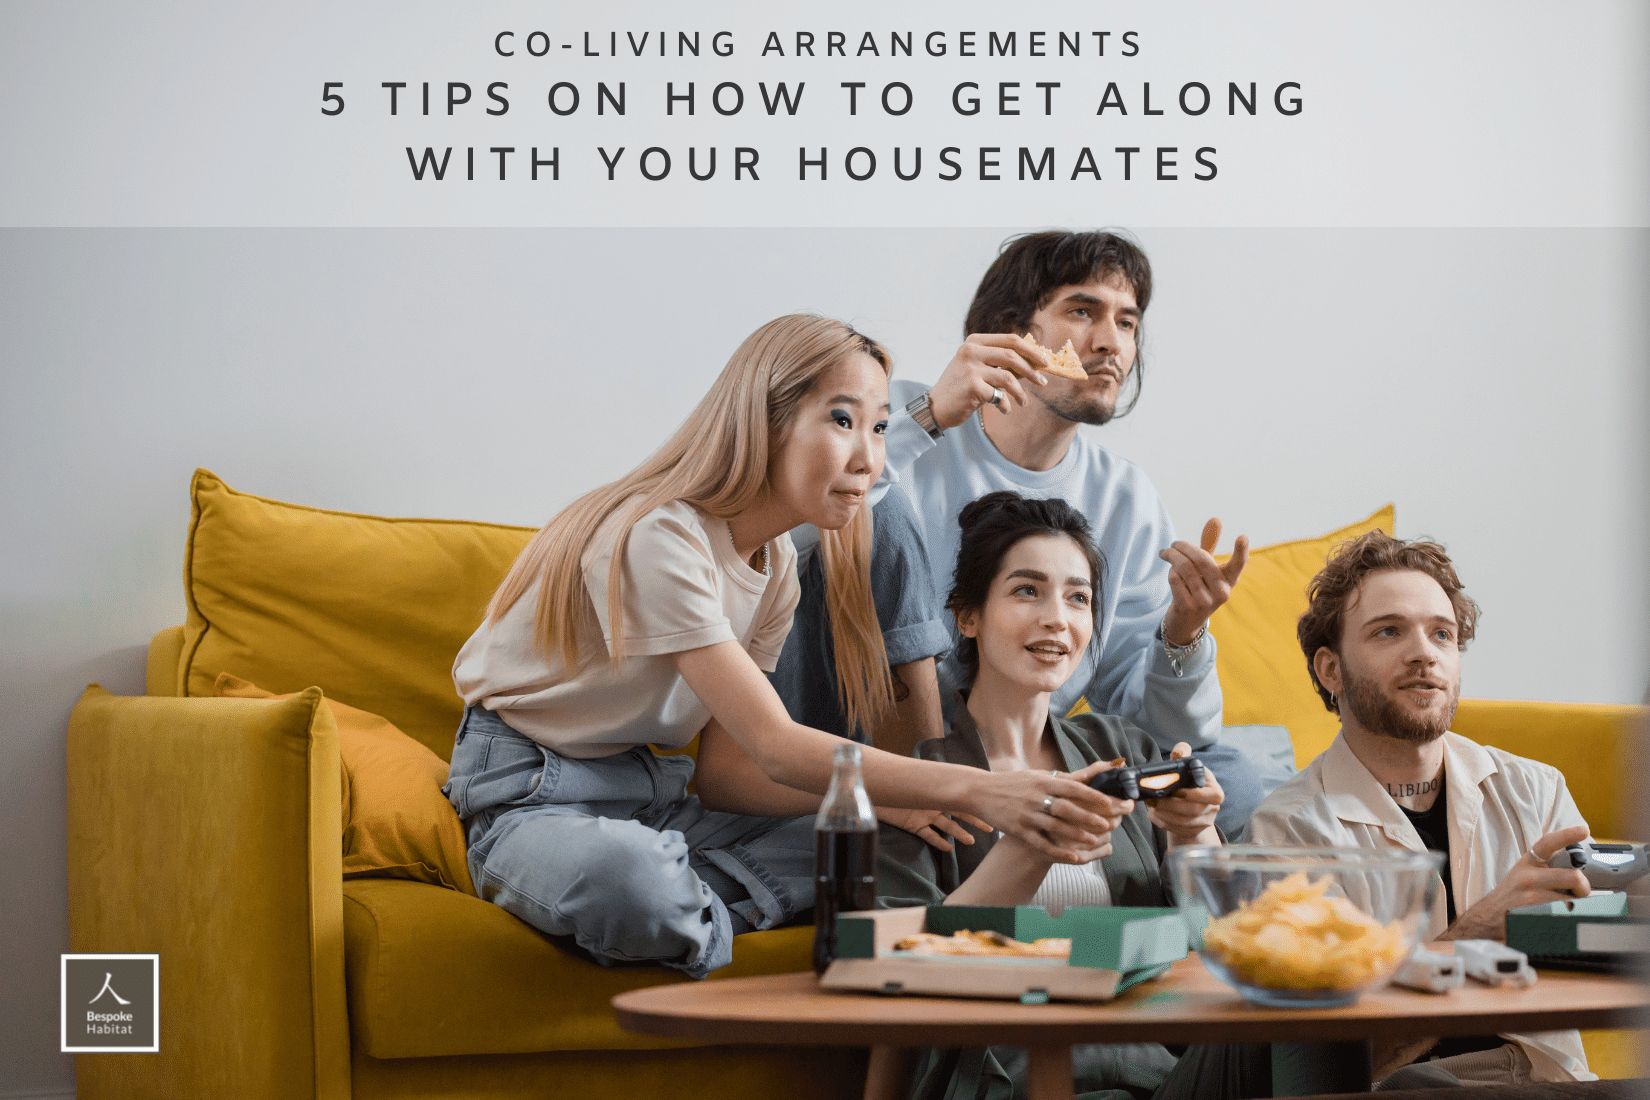 Co-Living Arrangements 5 Tips on How to Get Along with Your Housemates